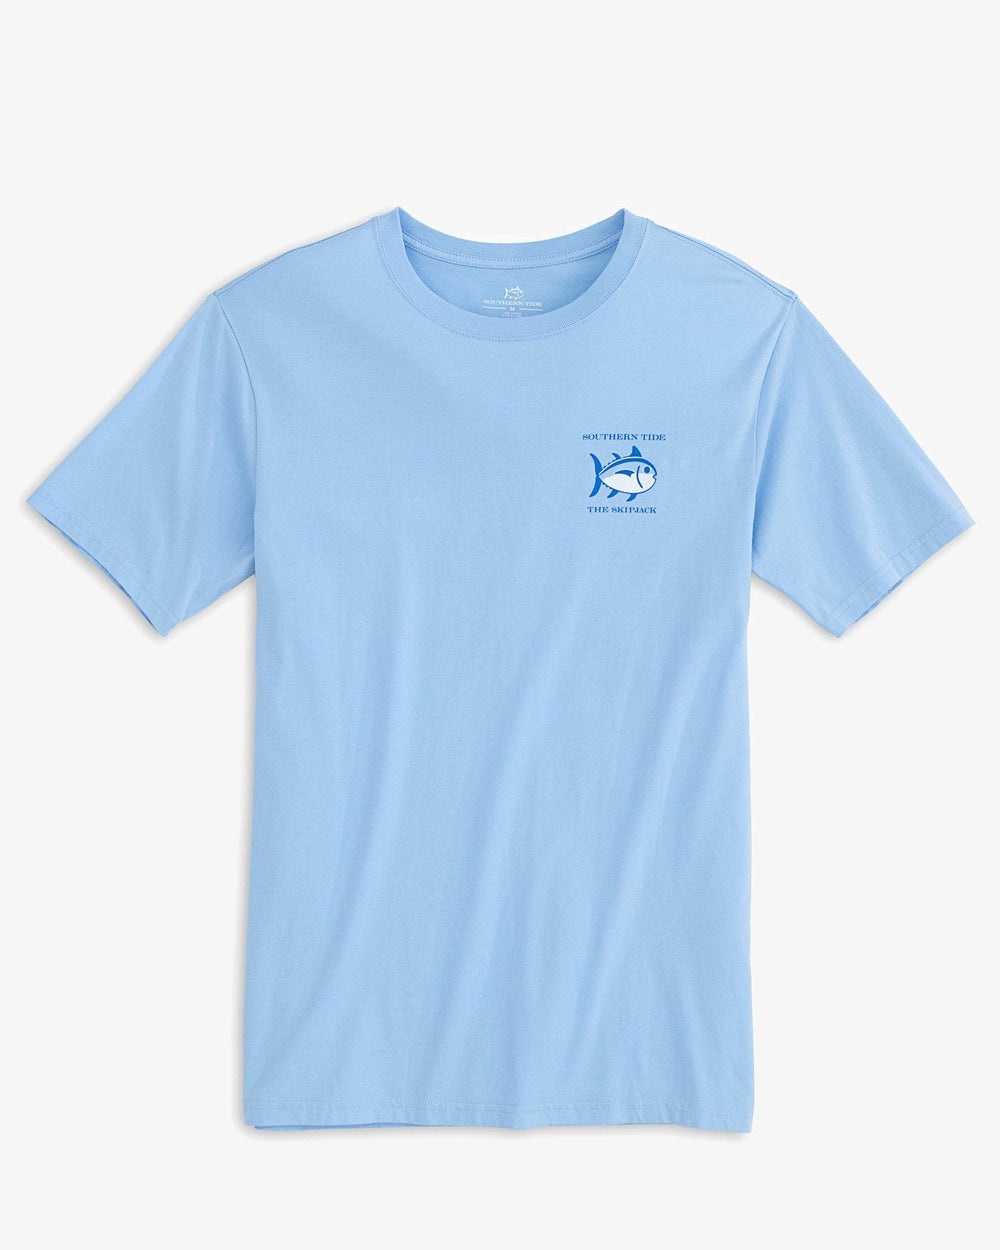 The front view of the Men's Blue Original Skipjack Short Sleeve T-Shirt by Southern Tide - Ocean Channel